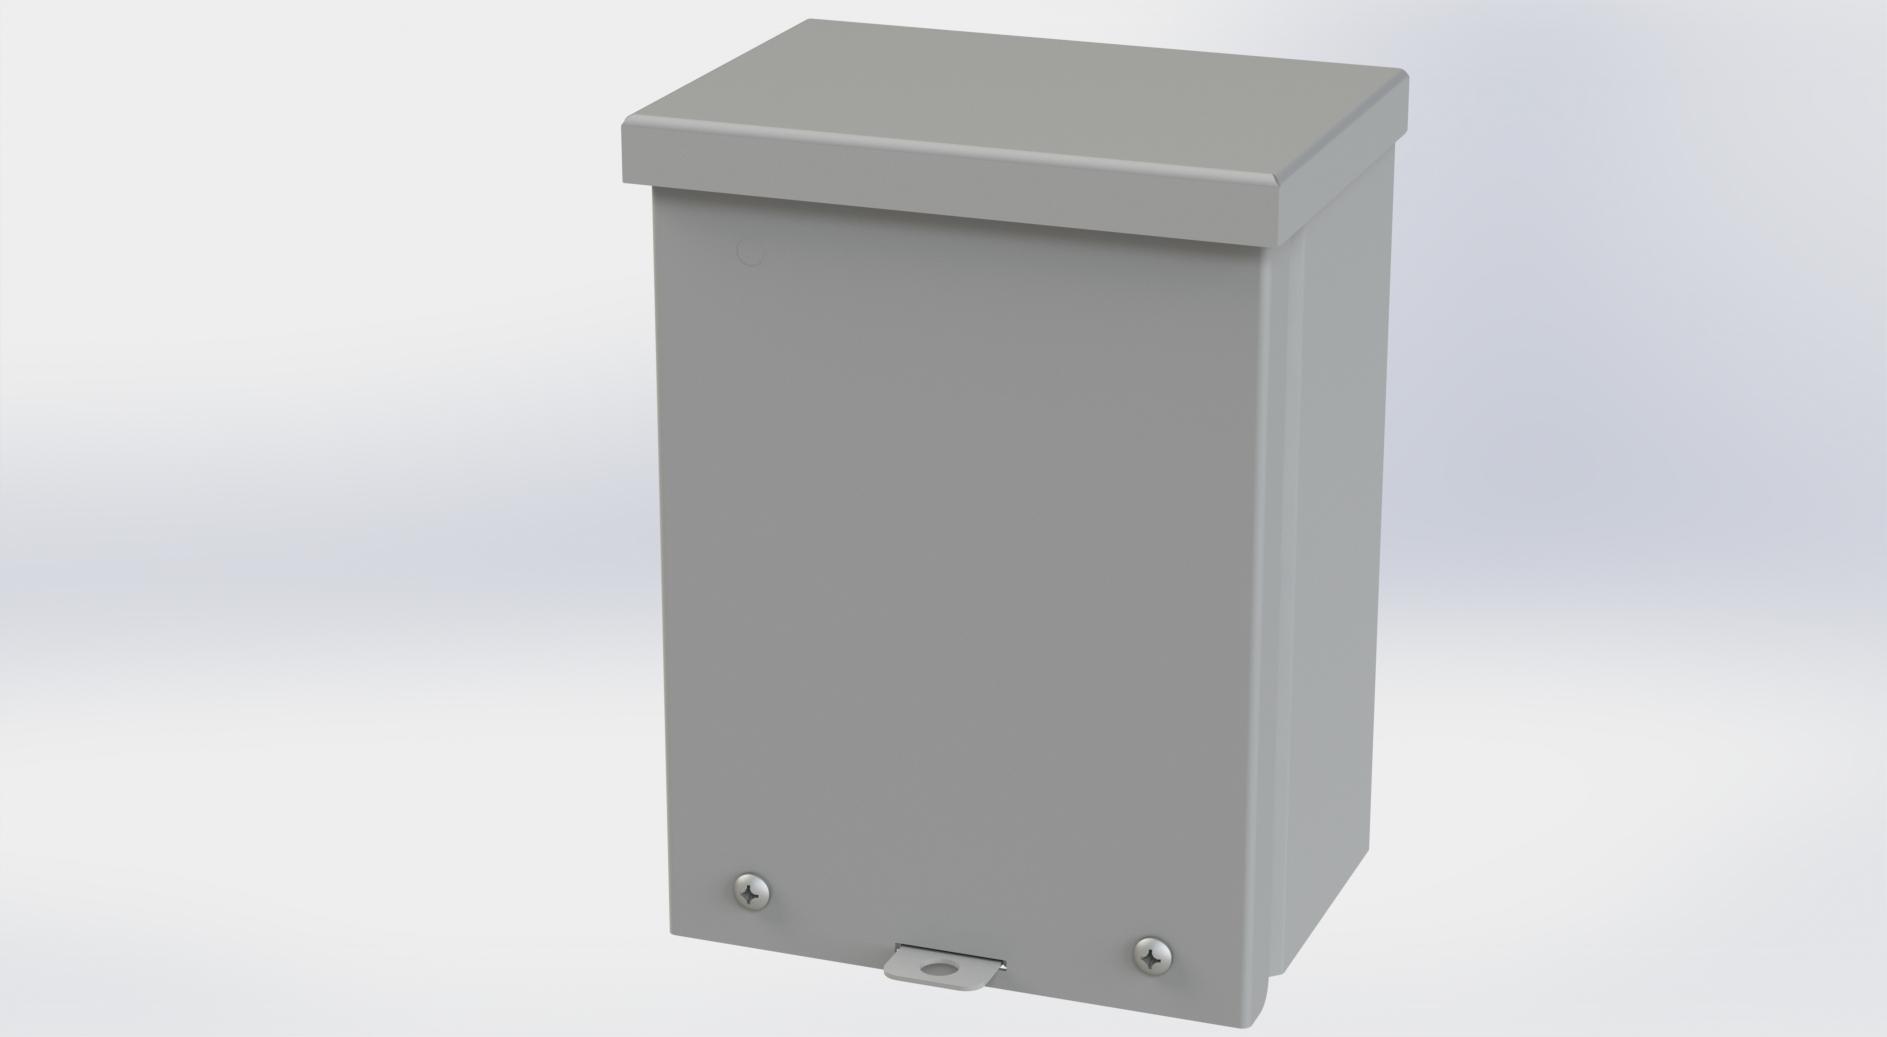 Saginaw Control SCE-8R64 Type-3R Screw Cover Enclosure, Height:8.00", Width:6.00", Depth:4.00", ANSI-61 gray powder coating inside and out.